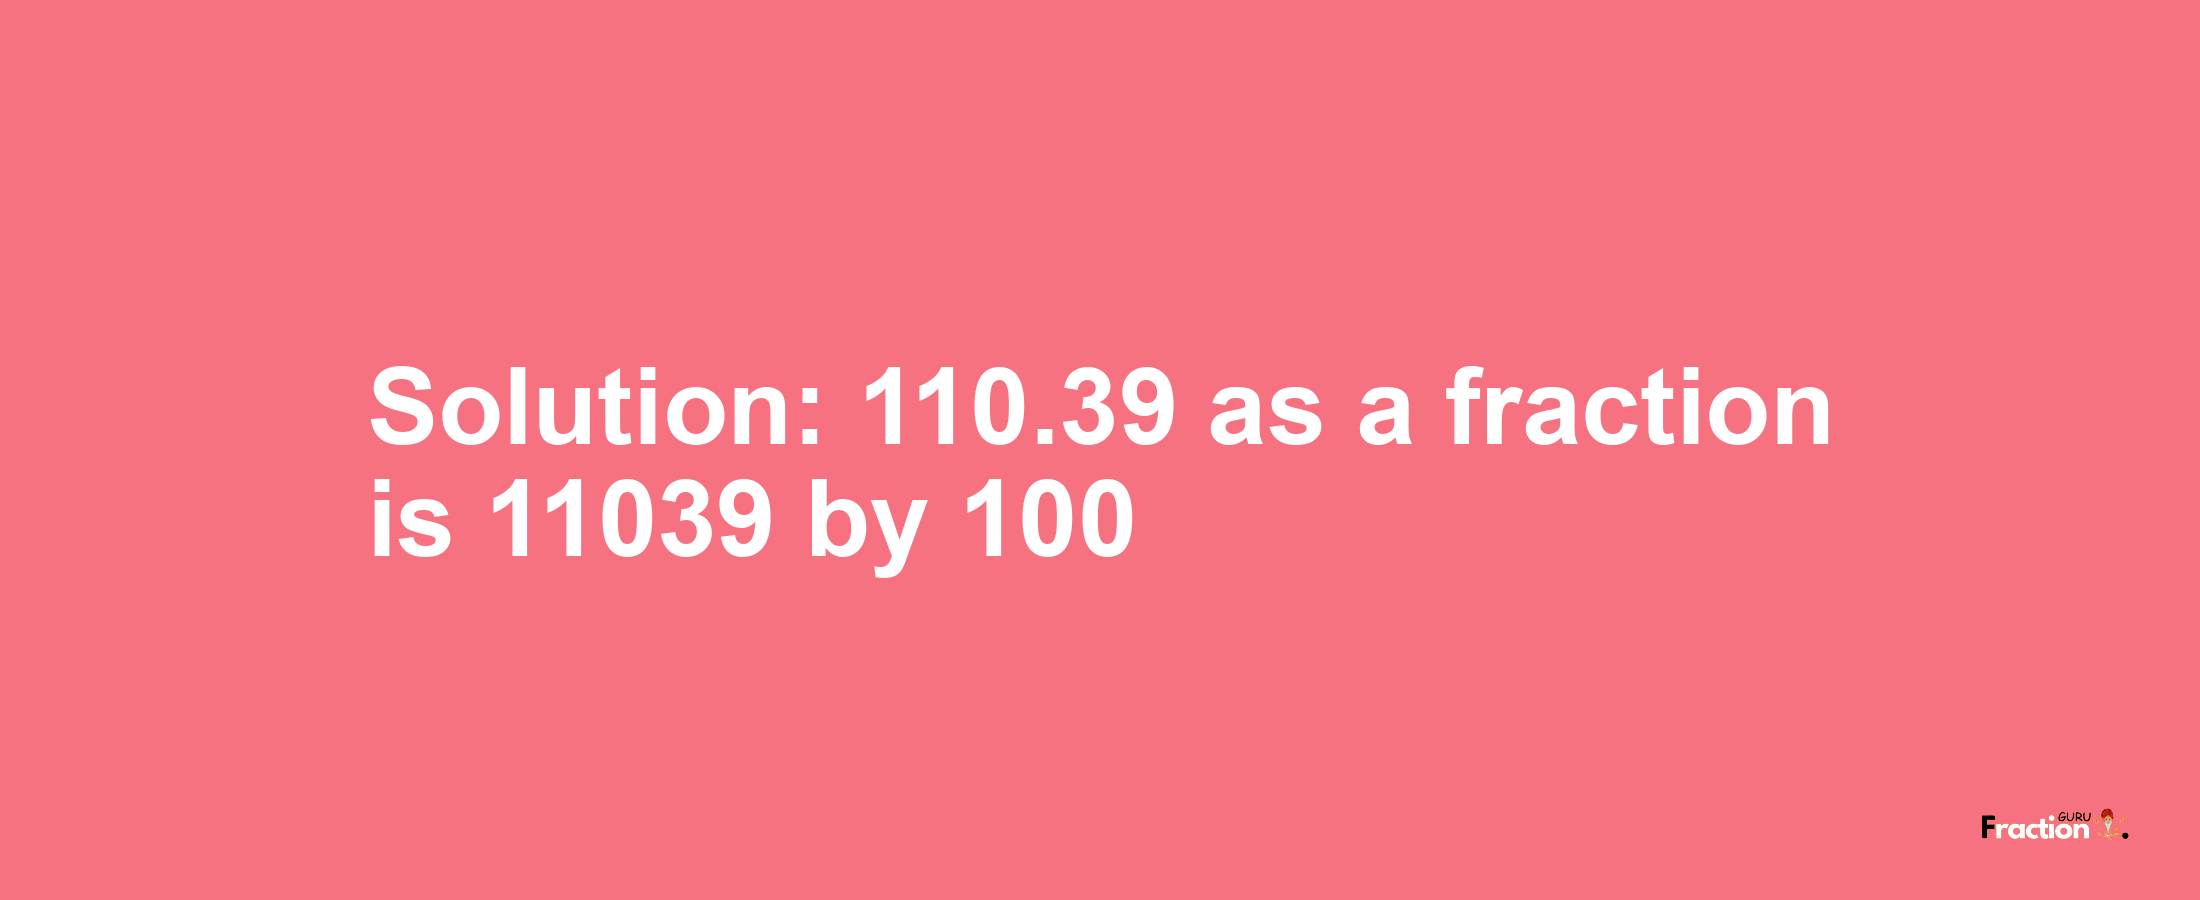 Solution:110.39 as a fraction is 11039/100